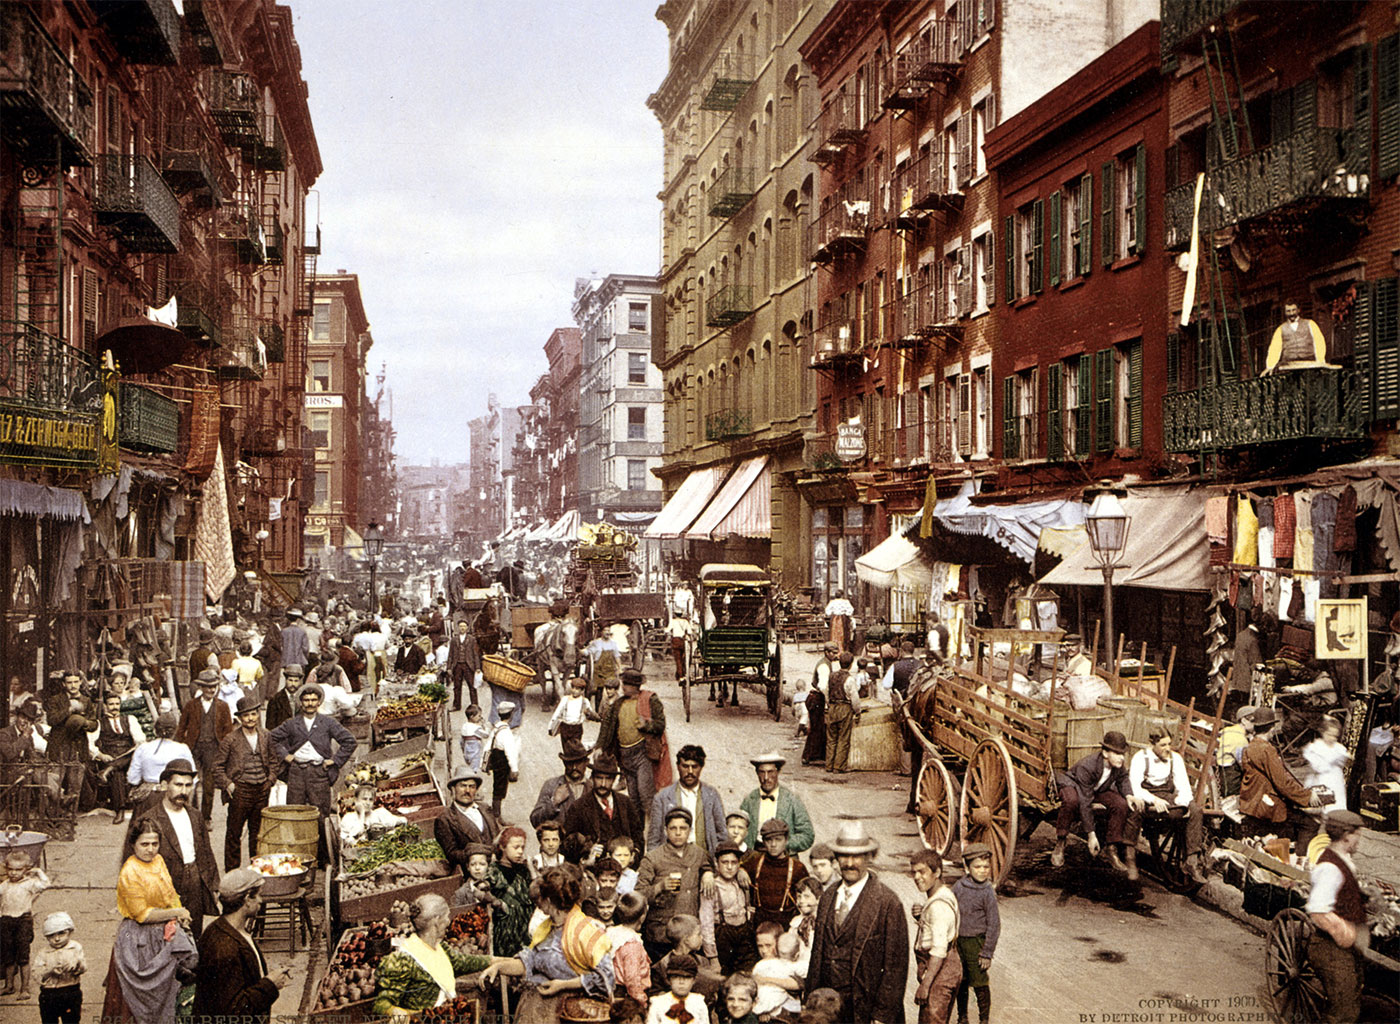 Mulberry Street on New York's Lower East Side, ca. 1900